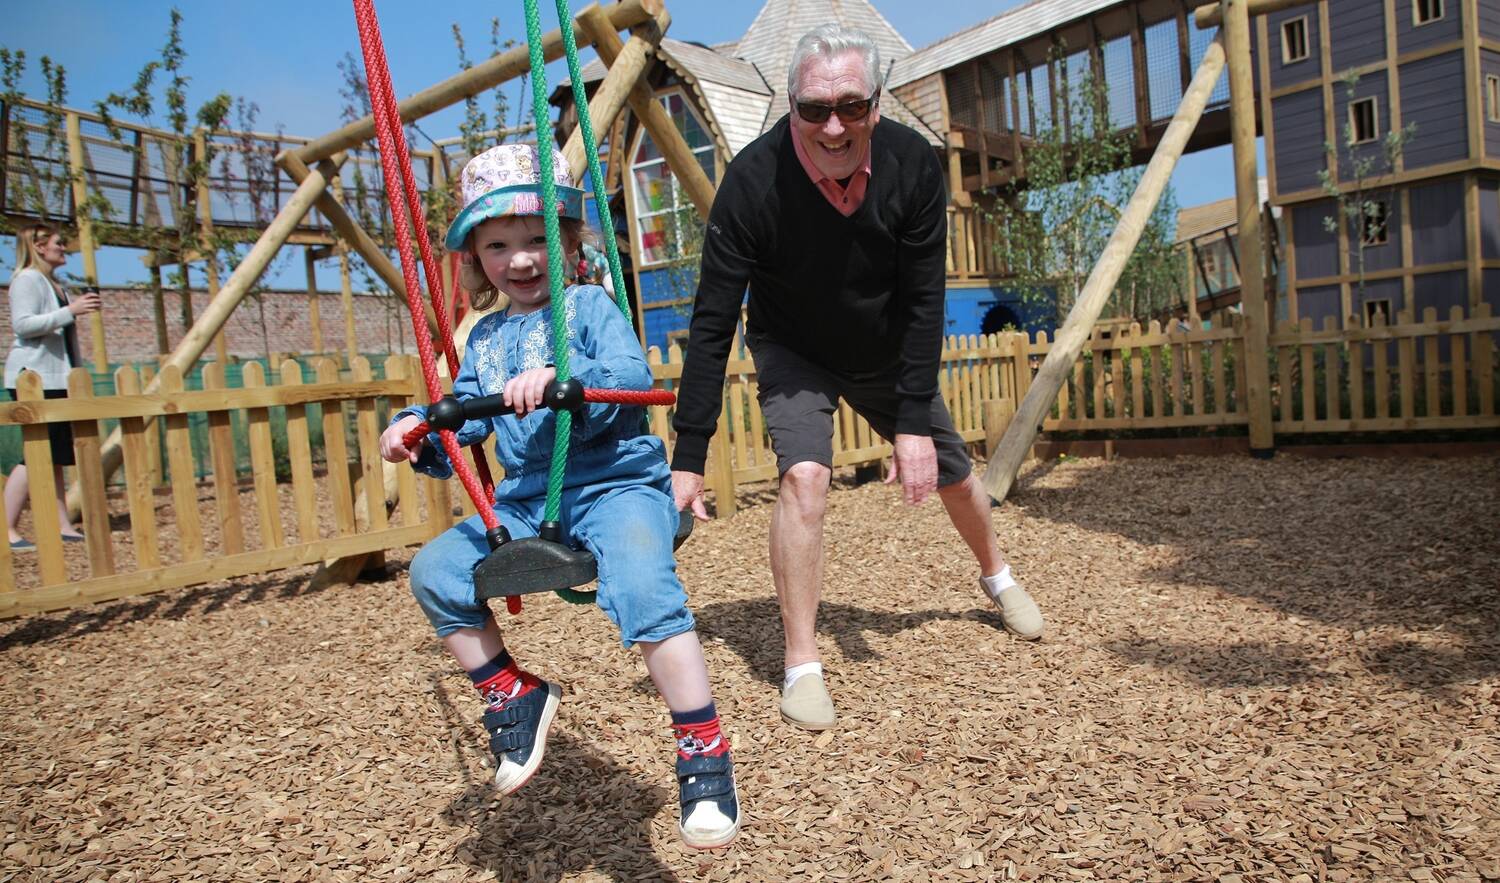 A child in a sun hat sits in a swing seat, while behind her a man with grey hair and sunglasses reaches out to push the swing for her.